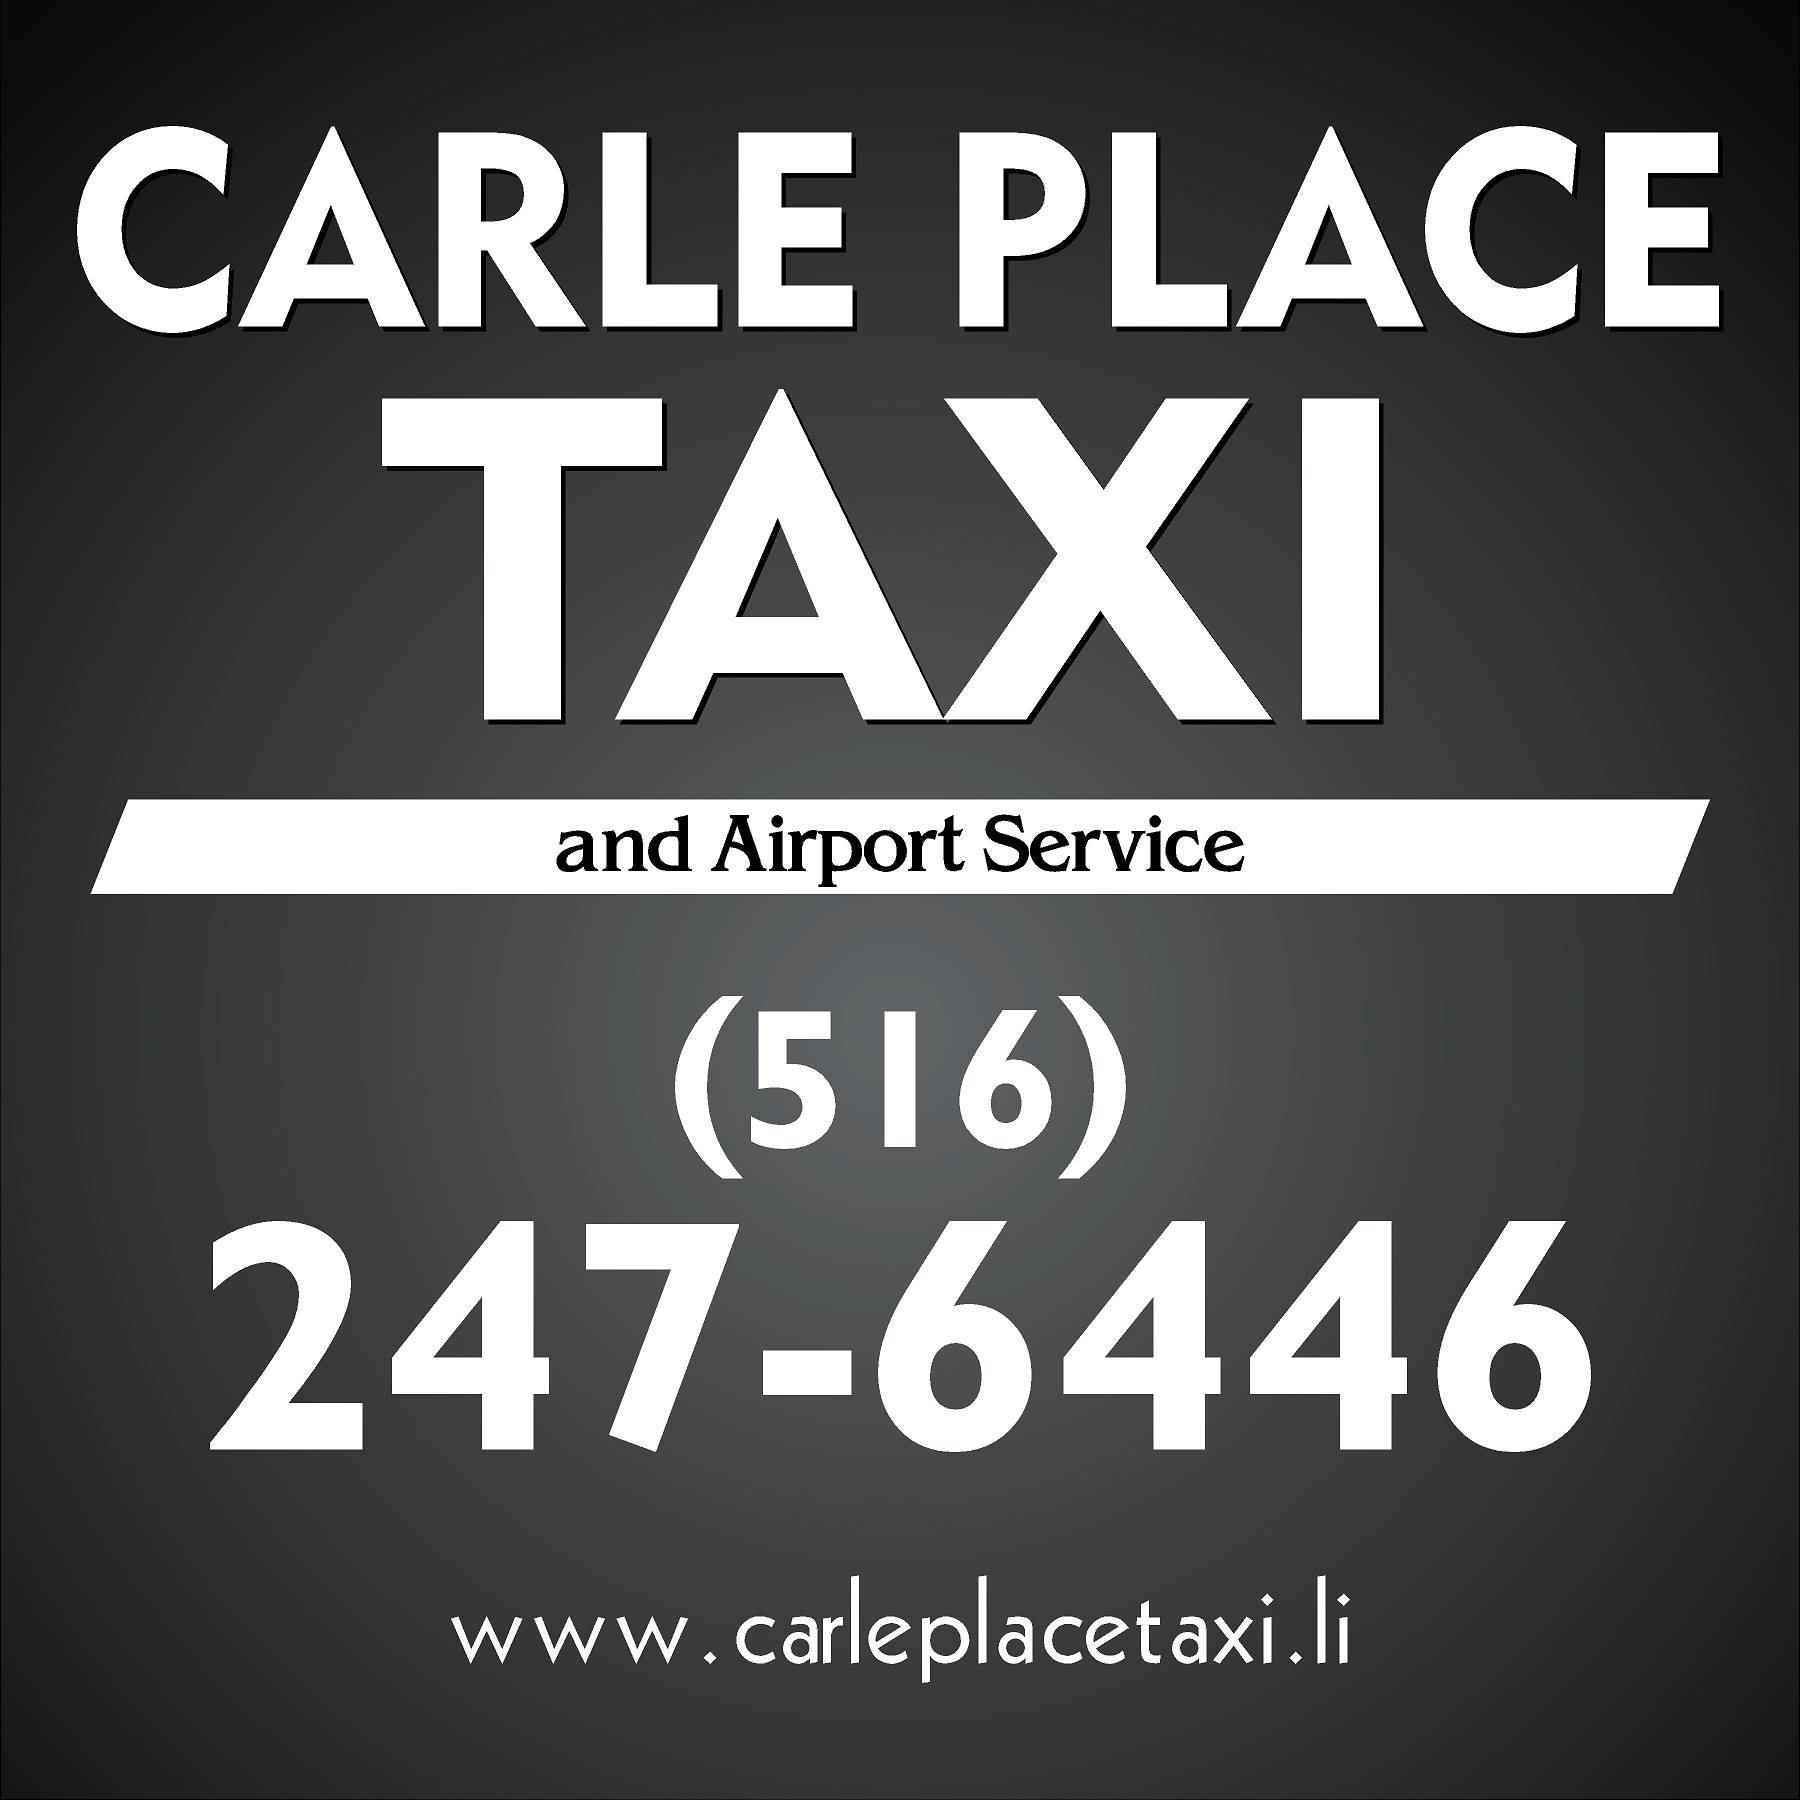 Business logo of Carle Place Taxi And Airport Service